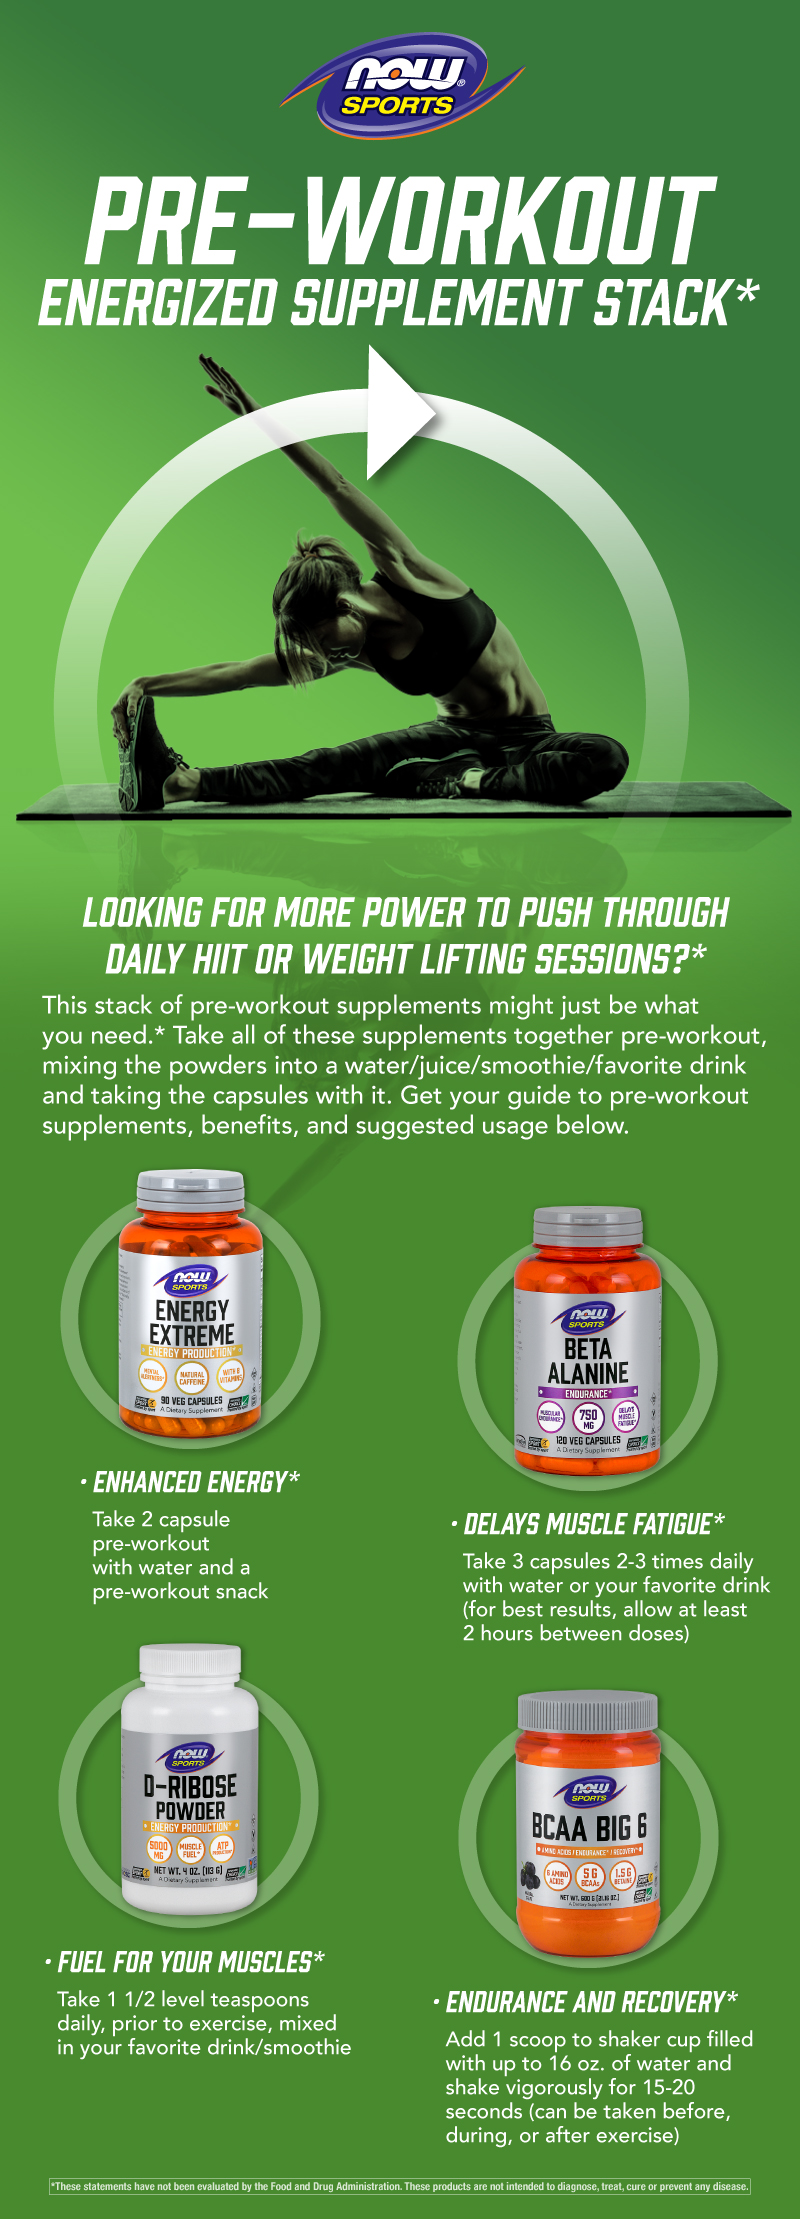 15 Minute Pre Workout Supplements Benefits for Push Pull Legs